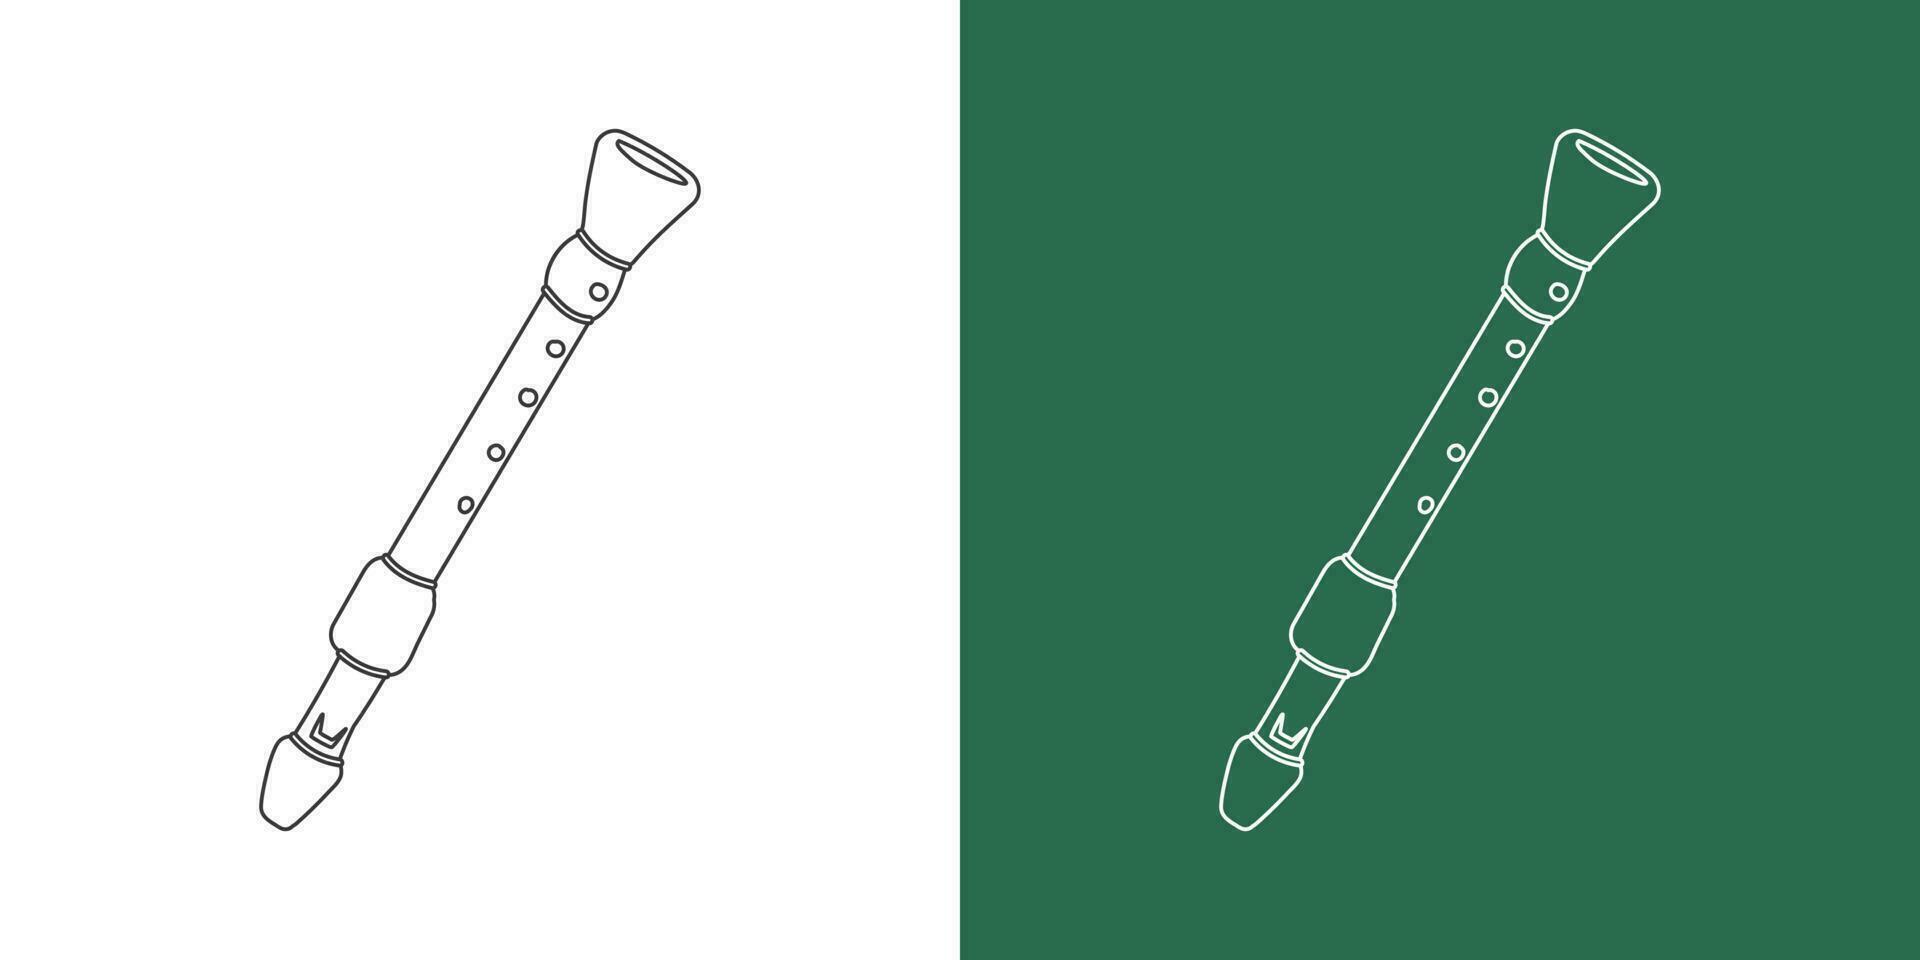 Recorder line drawing cartoon style. Woodwind instrument flute recorder clipart drawing in linear style isolated on white and chalkboard background. Musical instrument clipart concept, vector design